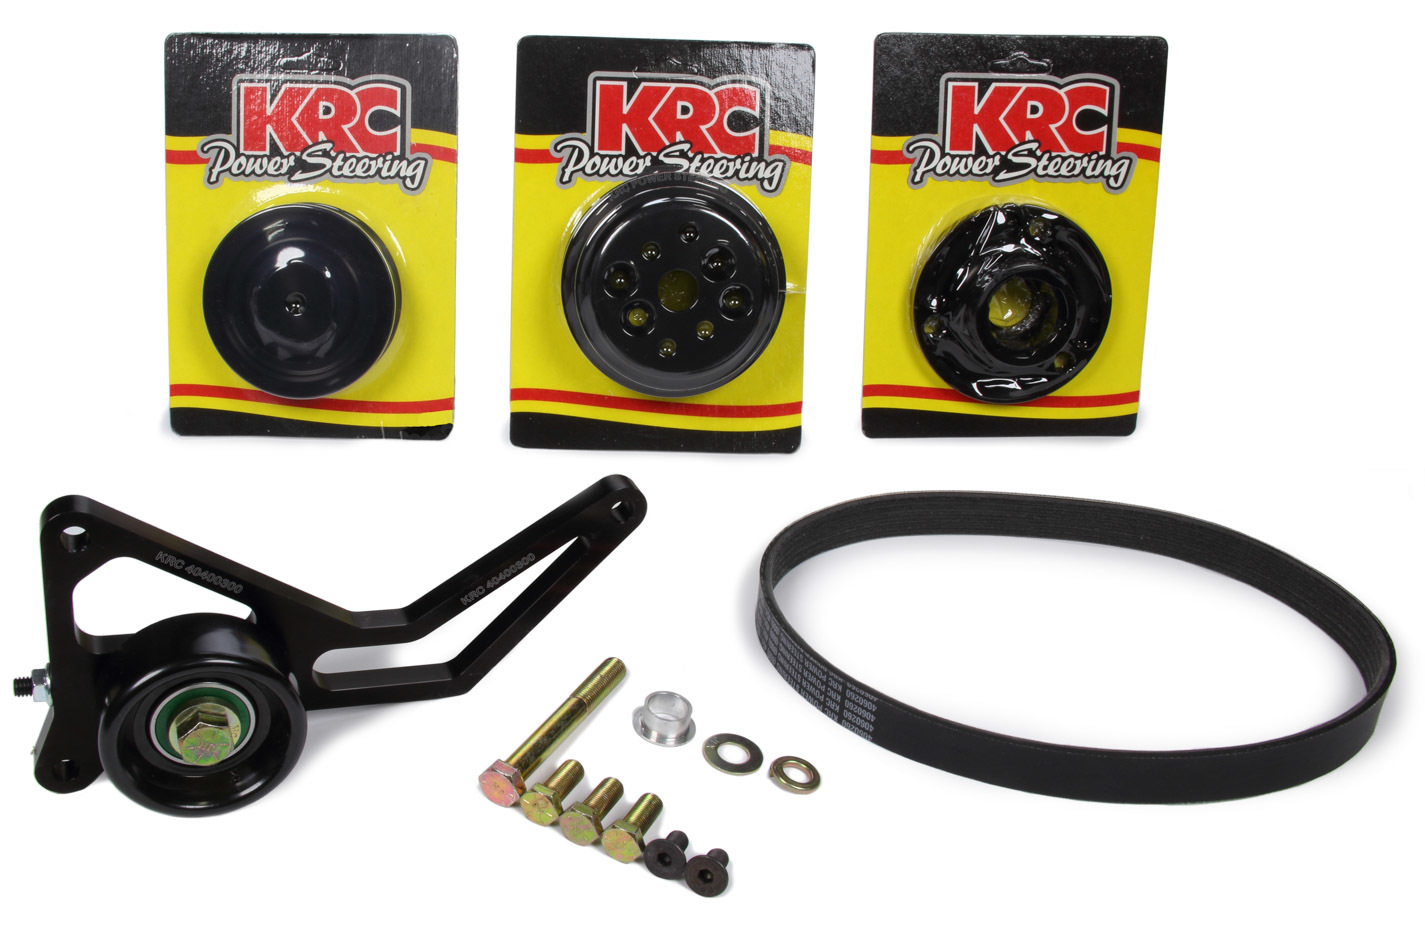 15% Serpentine Water Pump Only Drive Kit